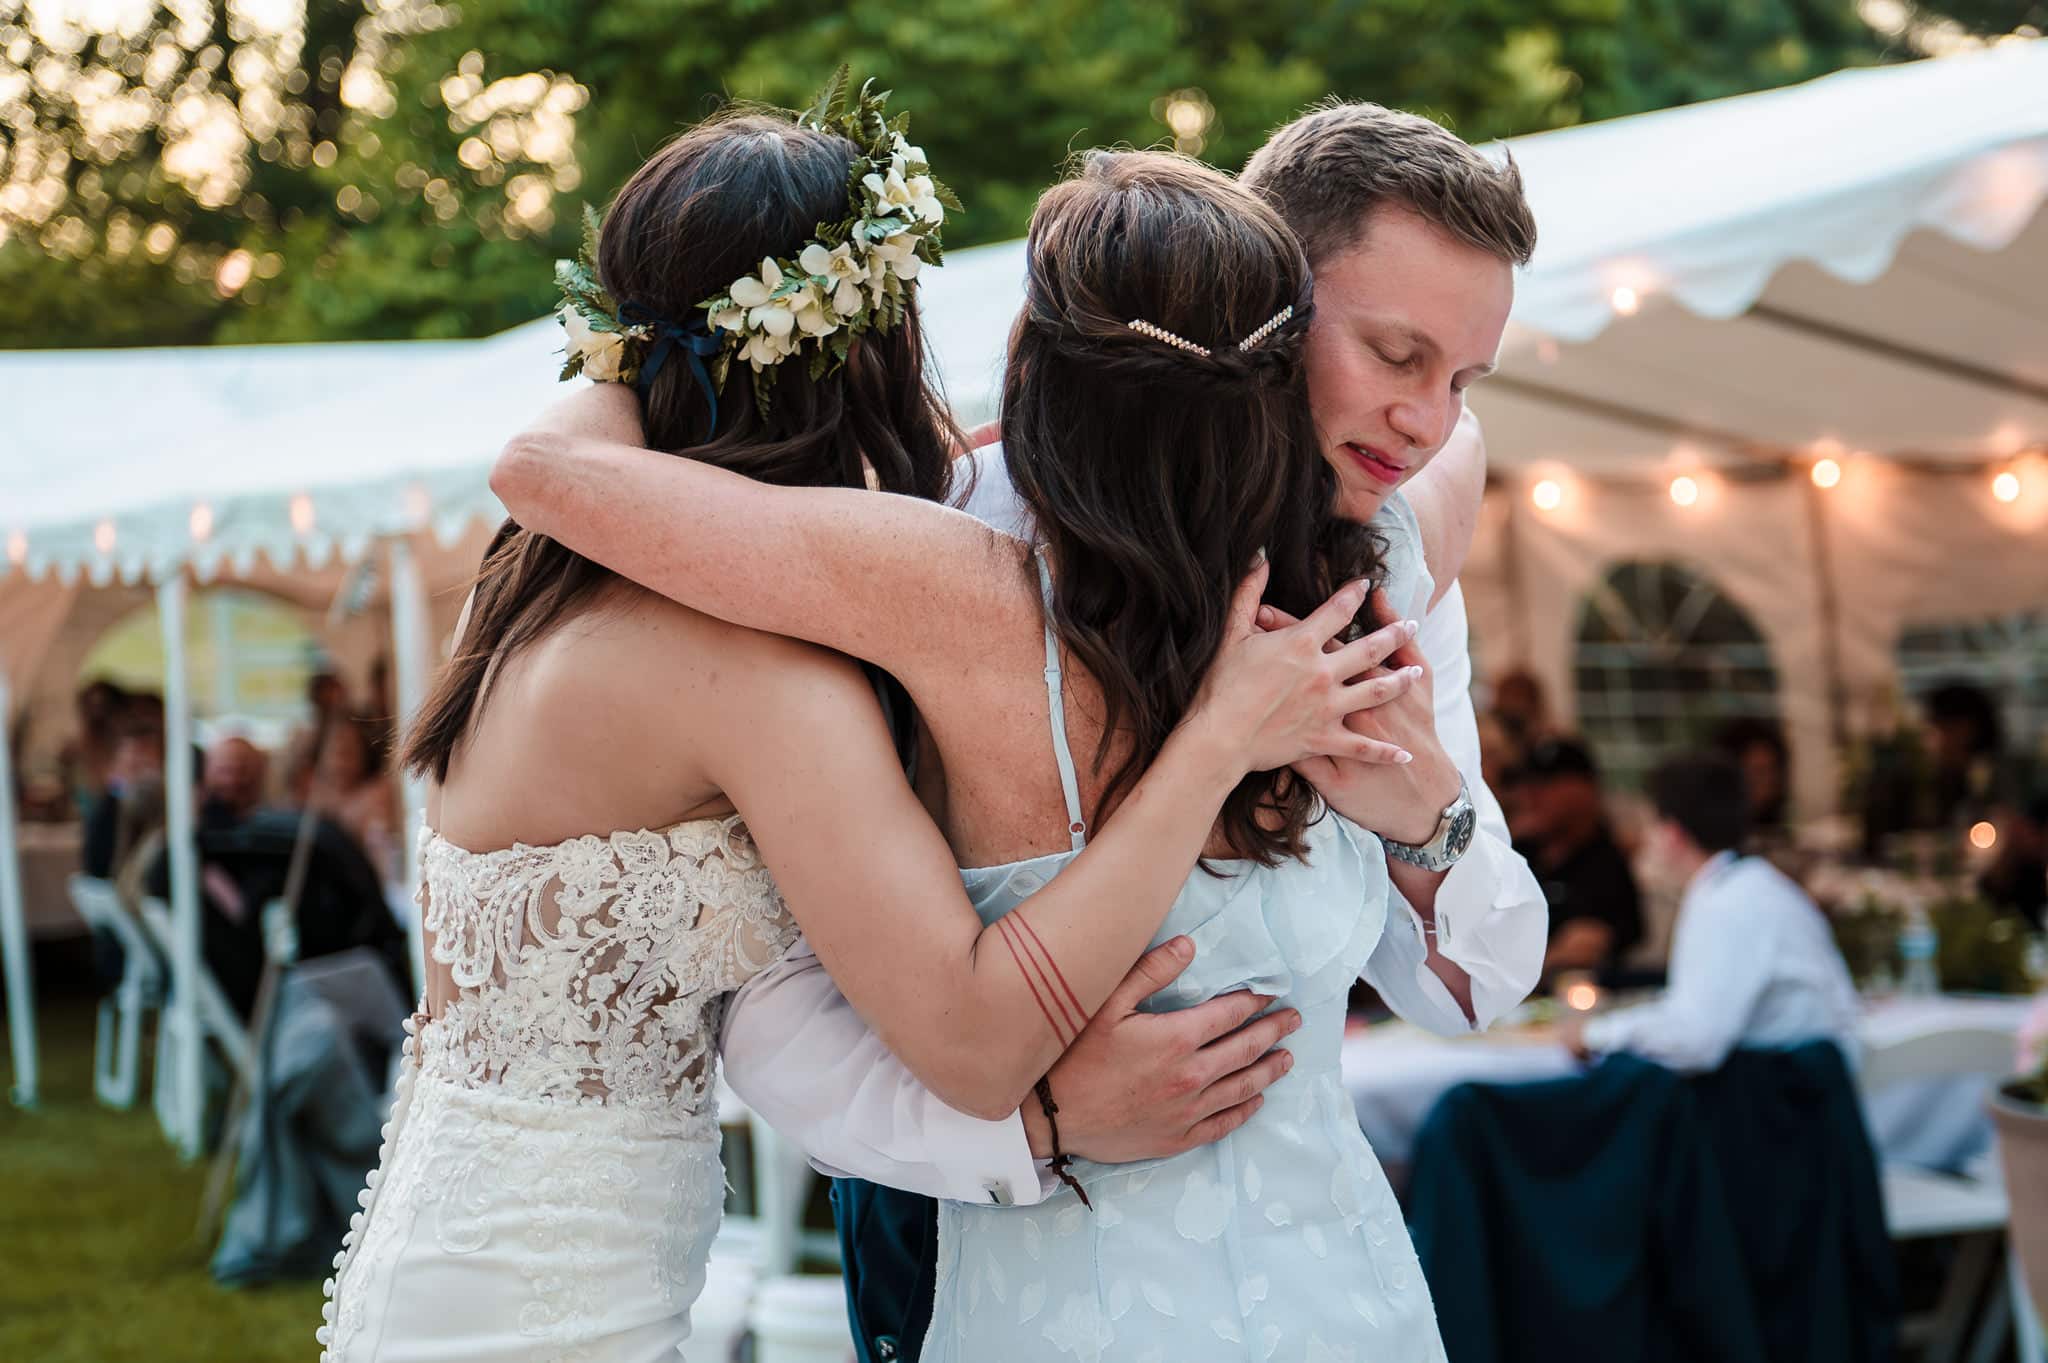 The groom hugs his mom and his bride following the mother and son dance.